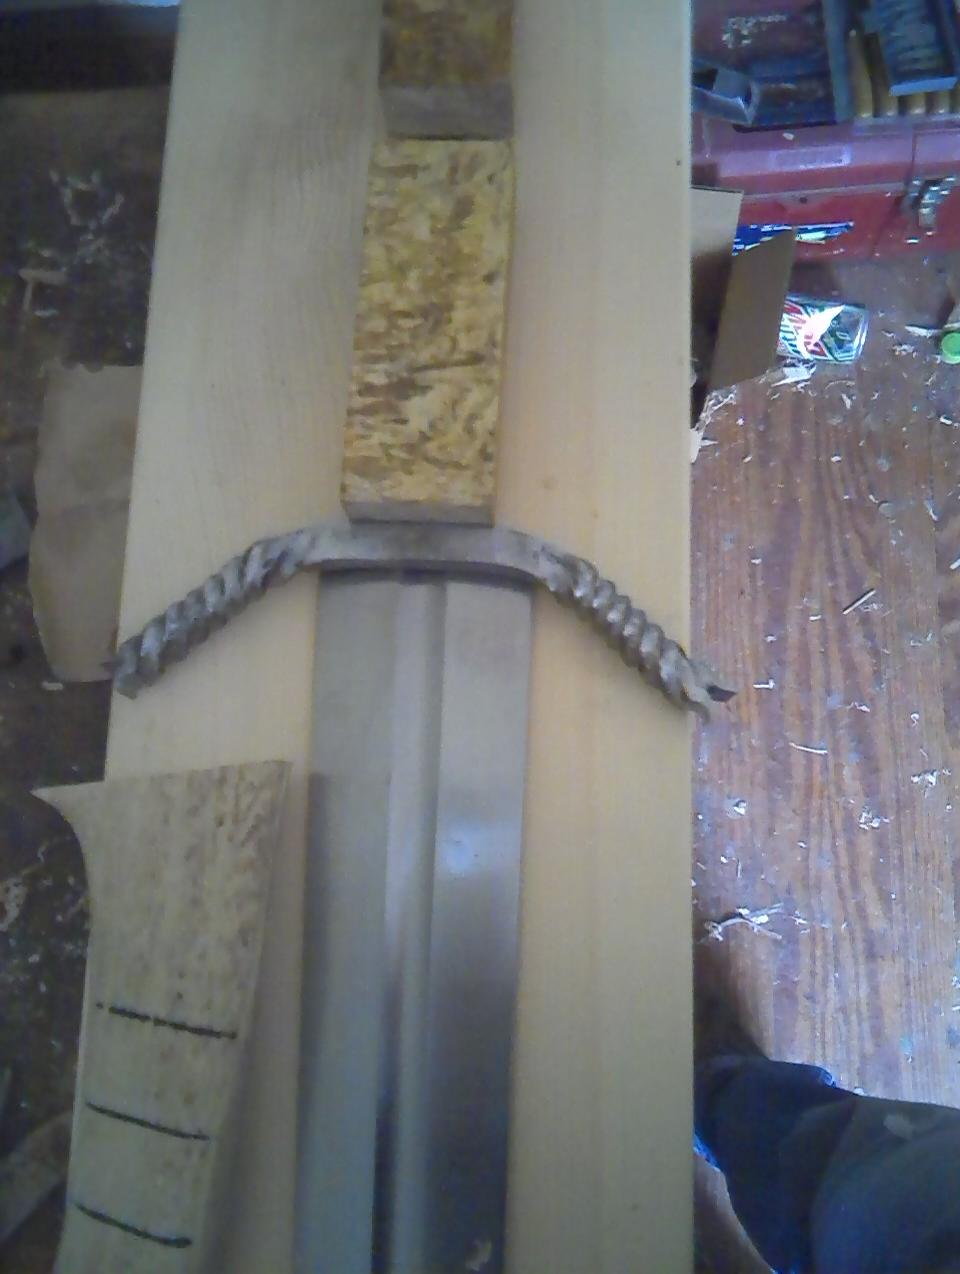 Blade  and  materials  laid  out  on  the  bench